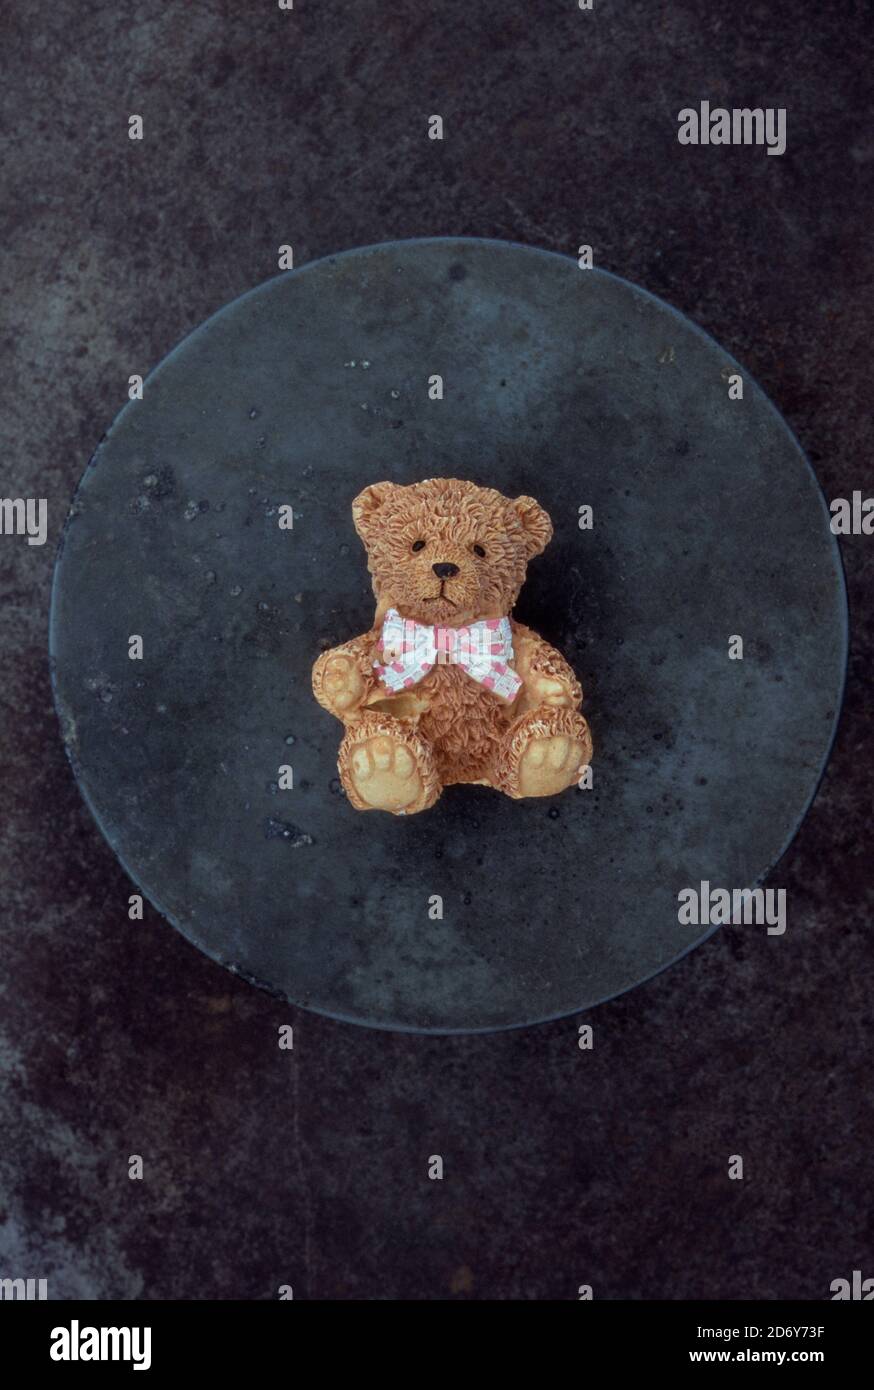 Fine detailed resin model of brown teddy bear wearing spotted pink and white bow tie lying on tarnished metal Stock Photo